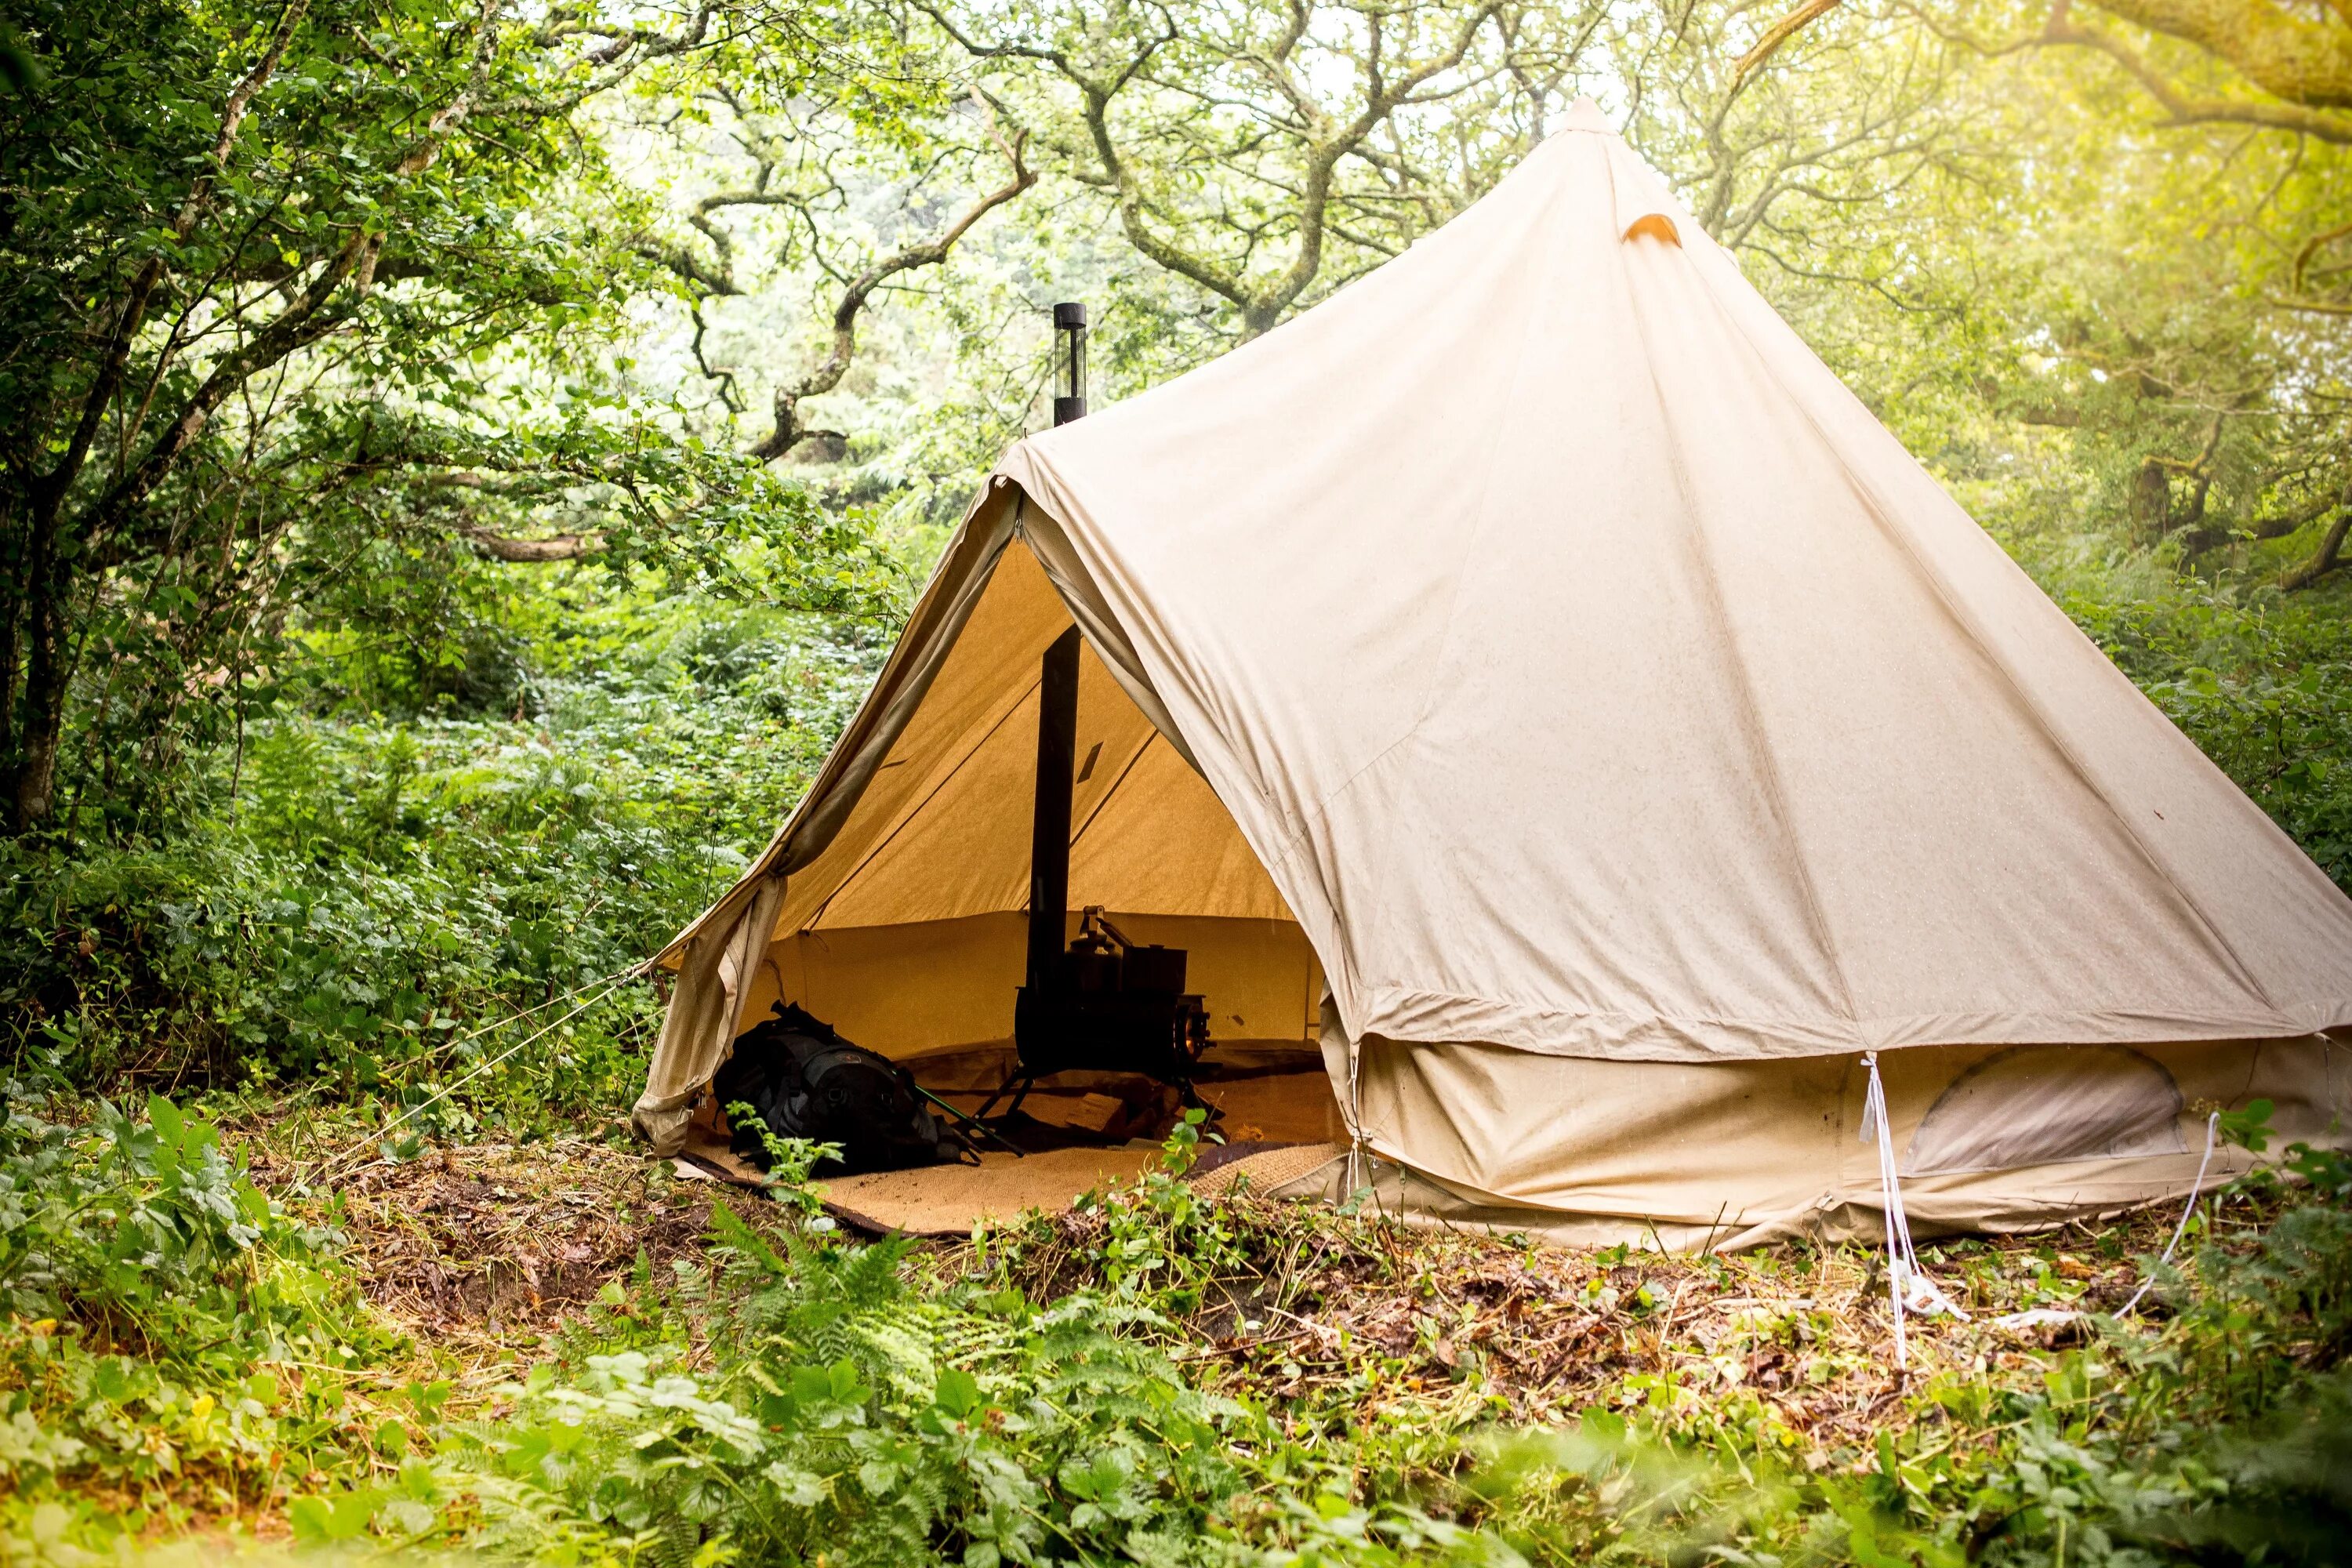 Stave camping. Woods палатка. Палатка из канваса. Stove Tent Wood. Canvas Bell Tent.